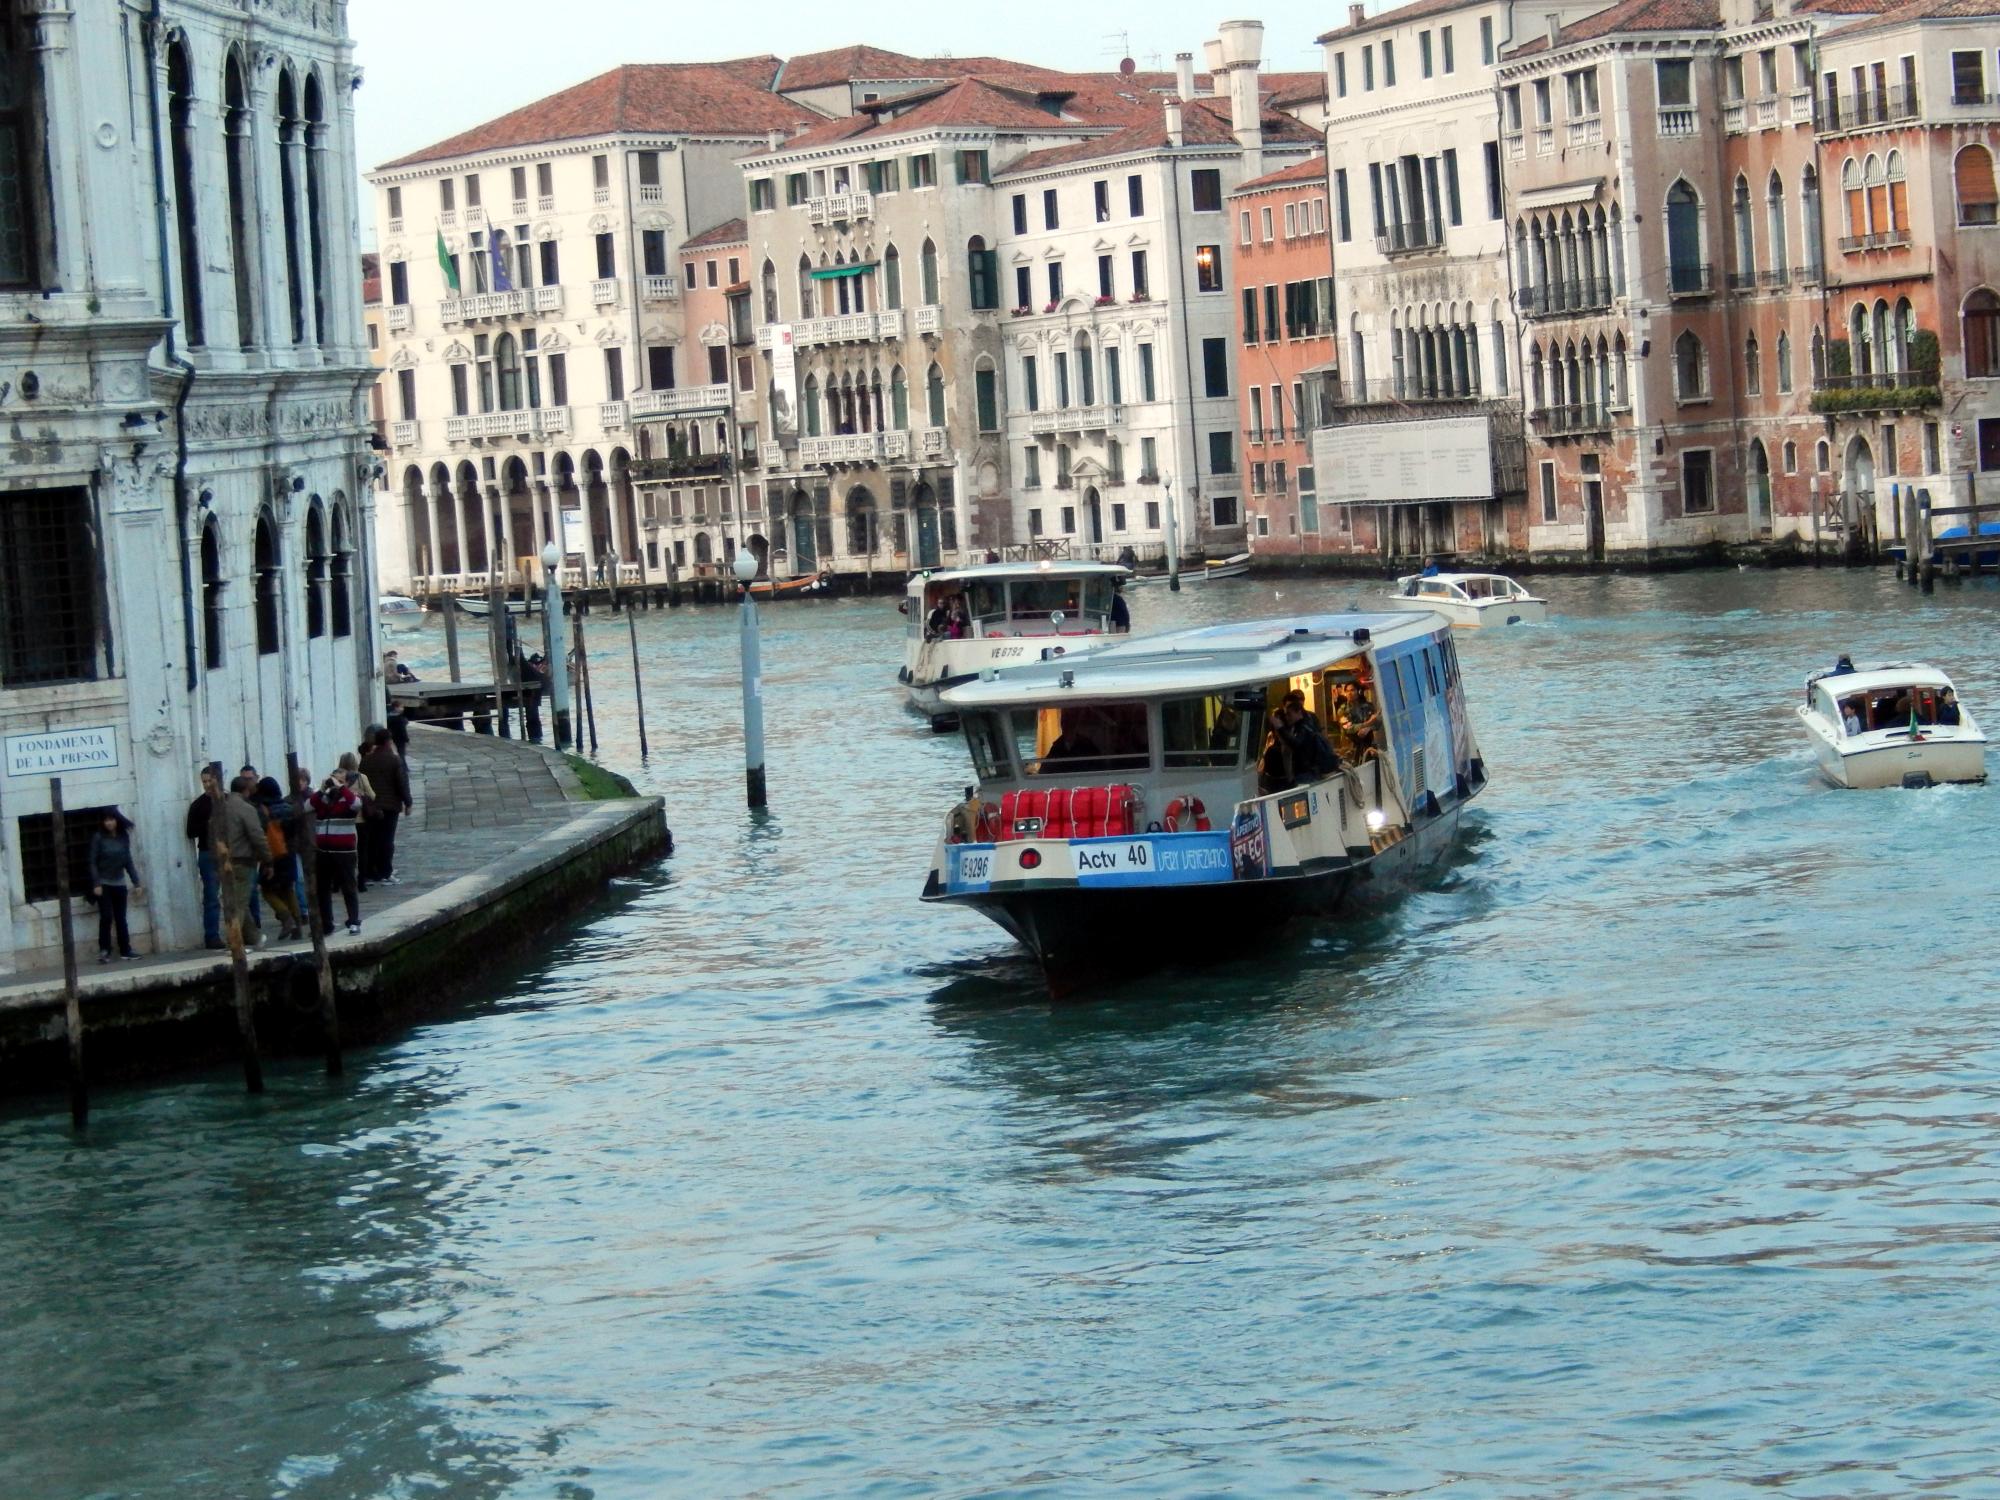 Italy - Canals #4